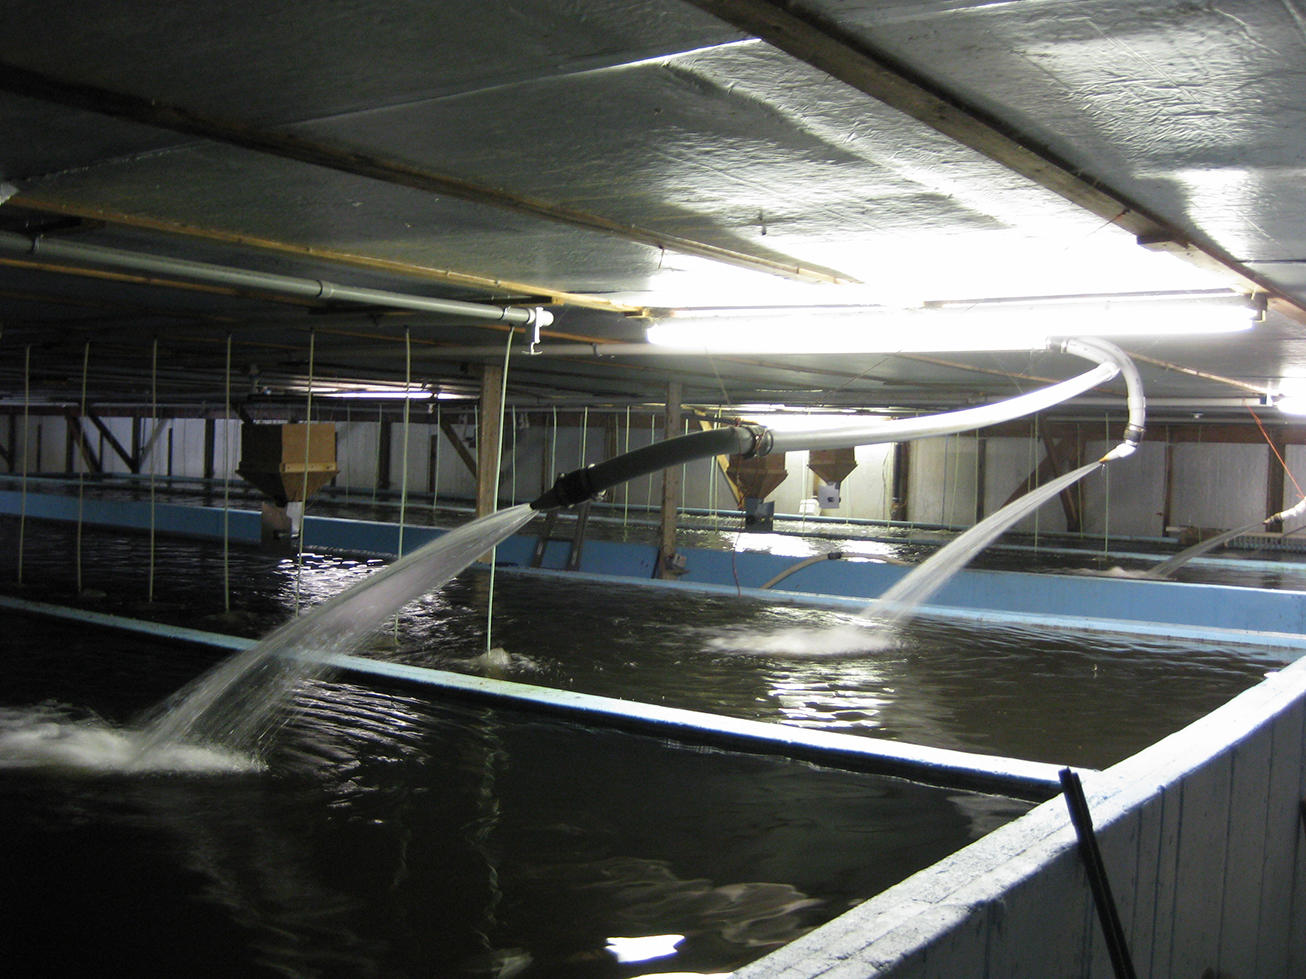 Hickling's Fish Farm Inc Coupons near me in Edmeston, NY 13335 | 8coupons